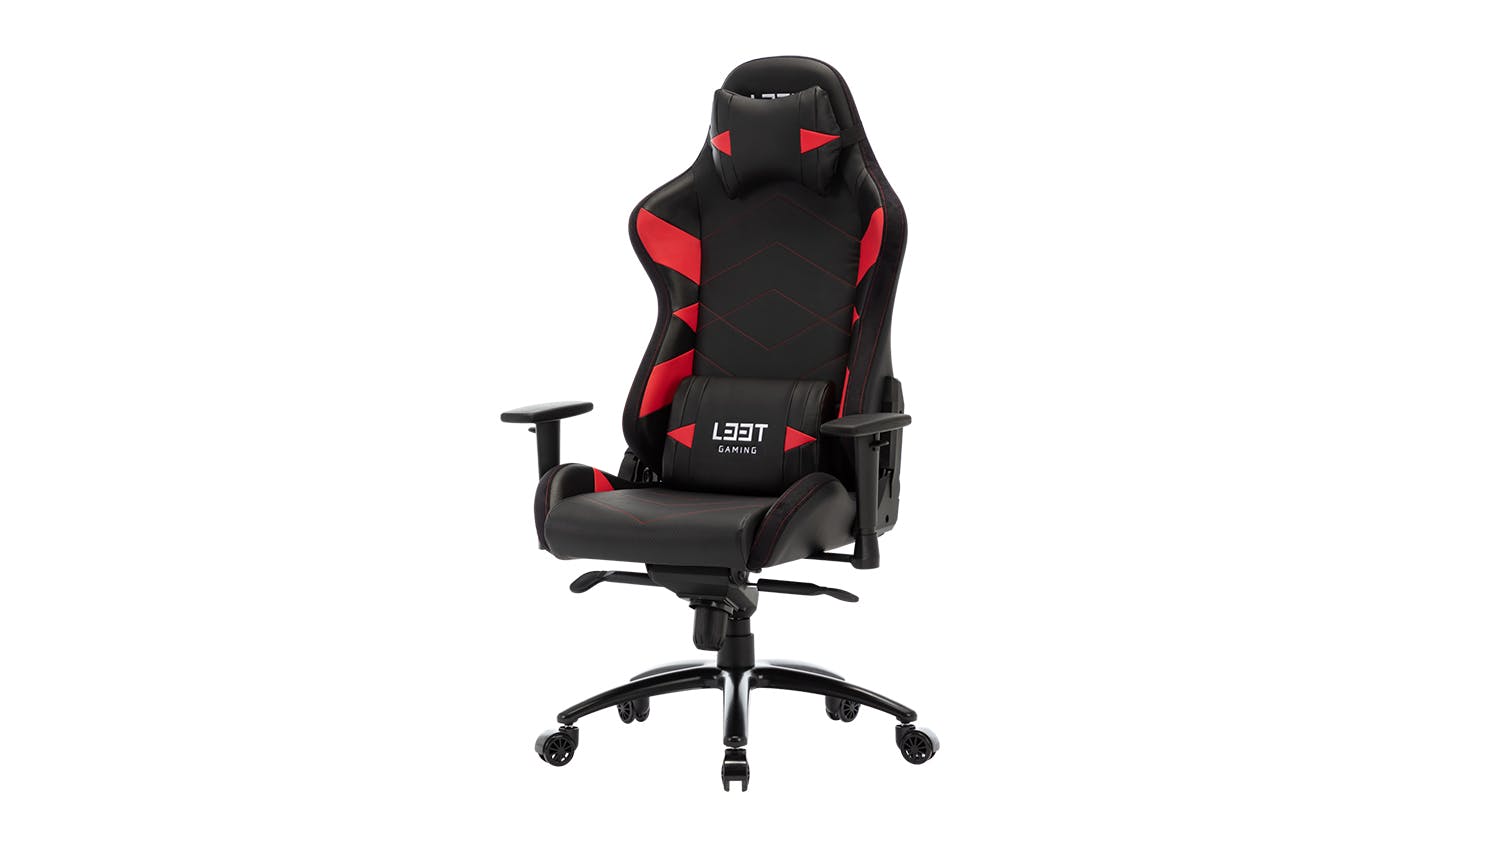 L33T Elite V4 Gaming Chair PU Leather - Red